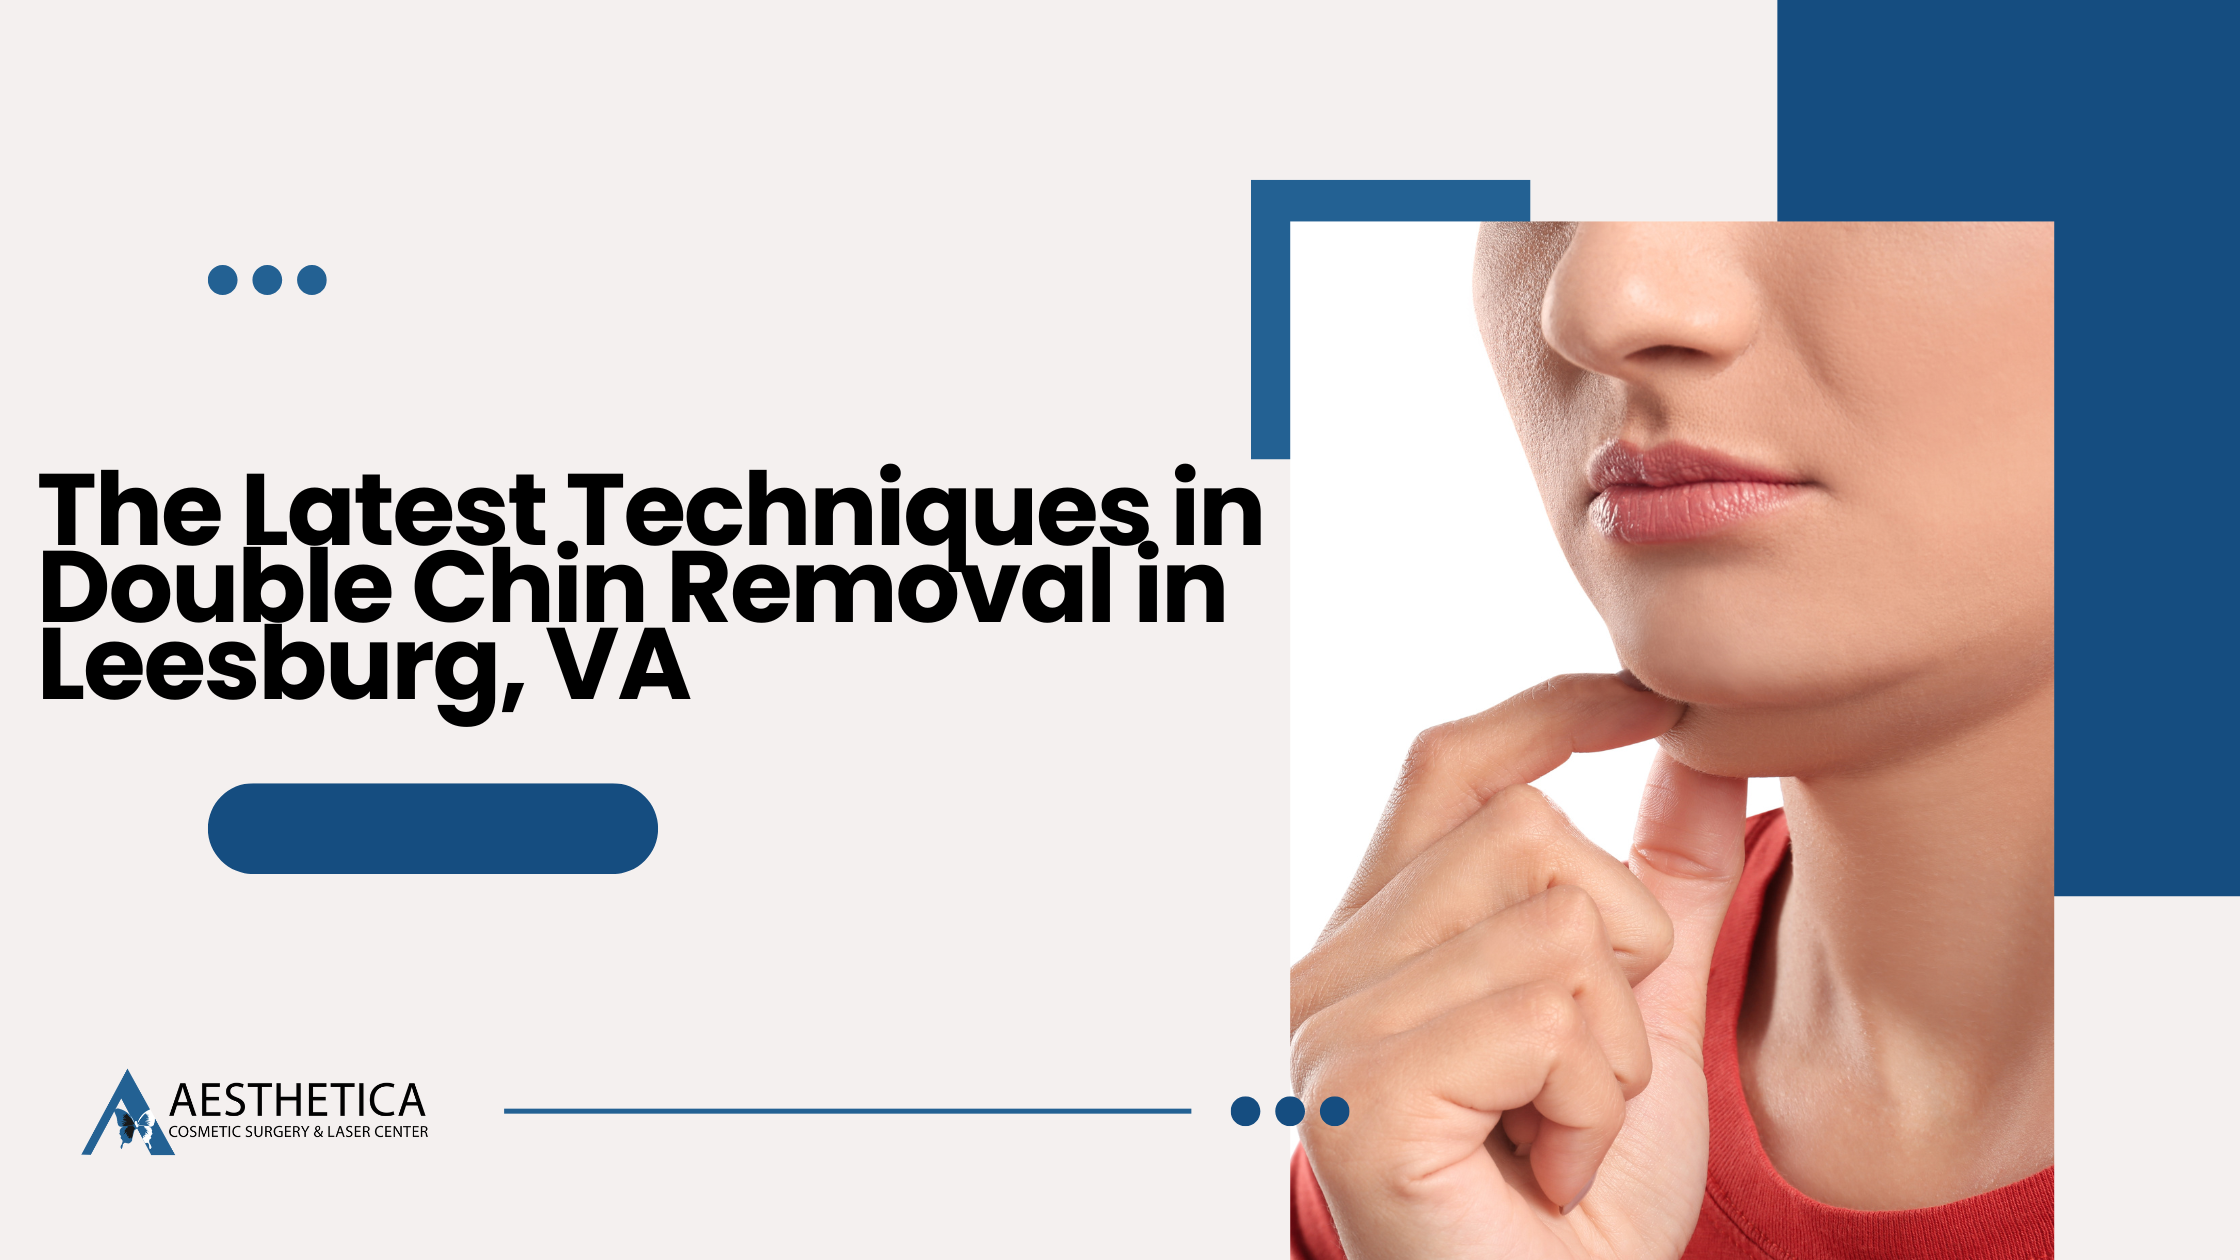 The Latest Techniques in Double Chin Removal in Leesburg, VA